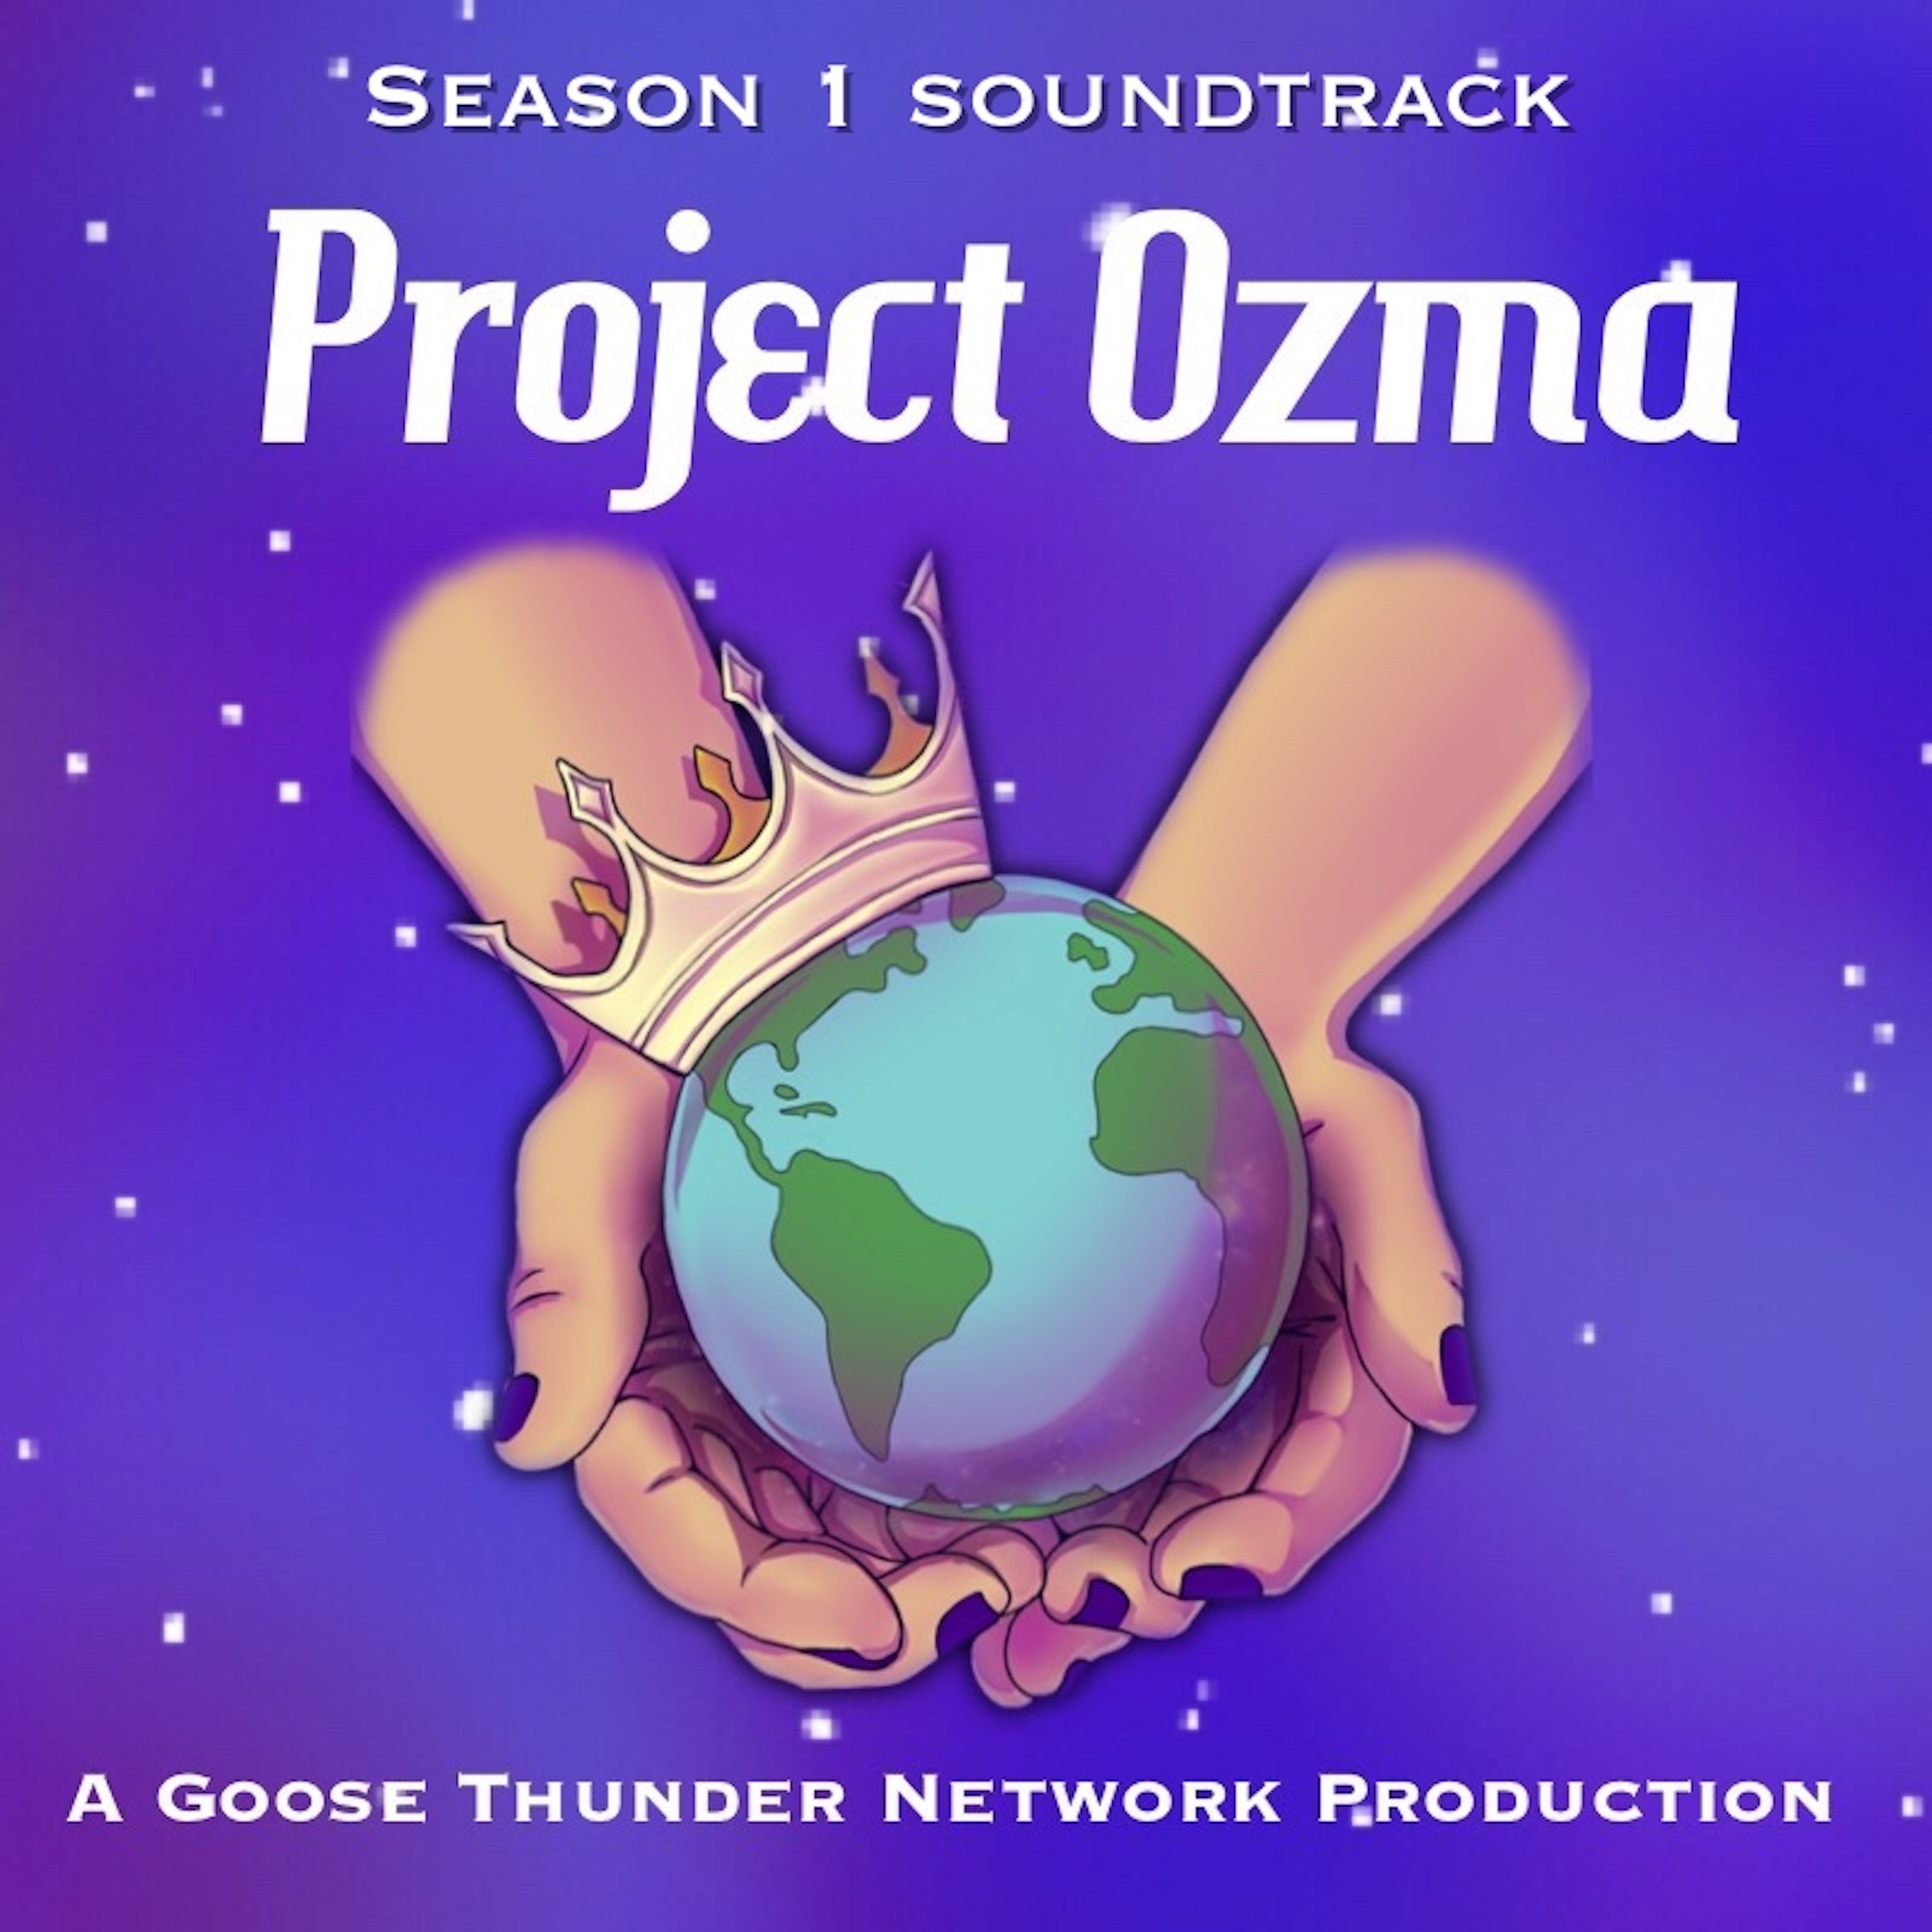 Project Ozma: The Official Soundtrack